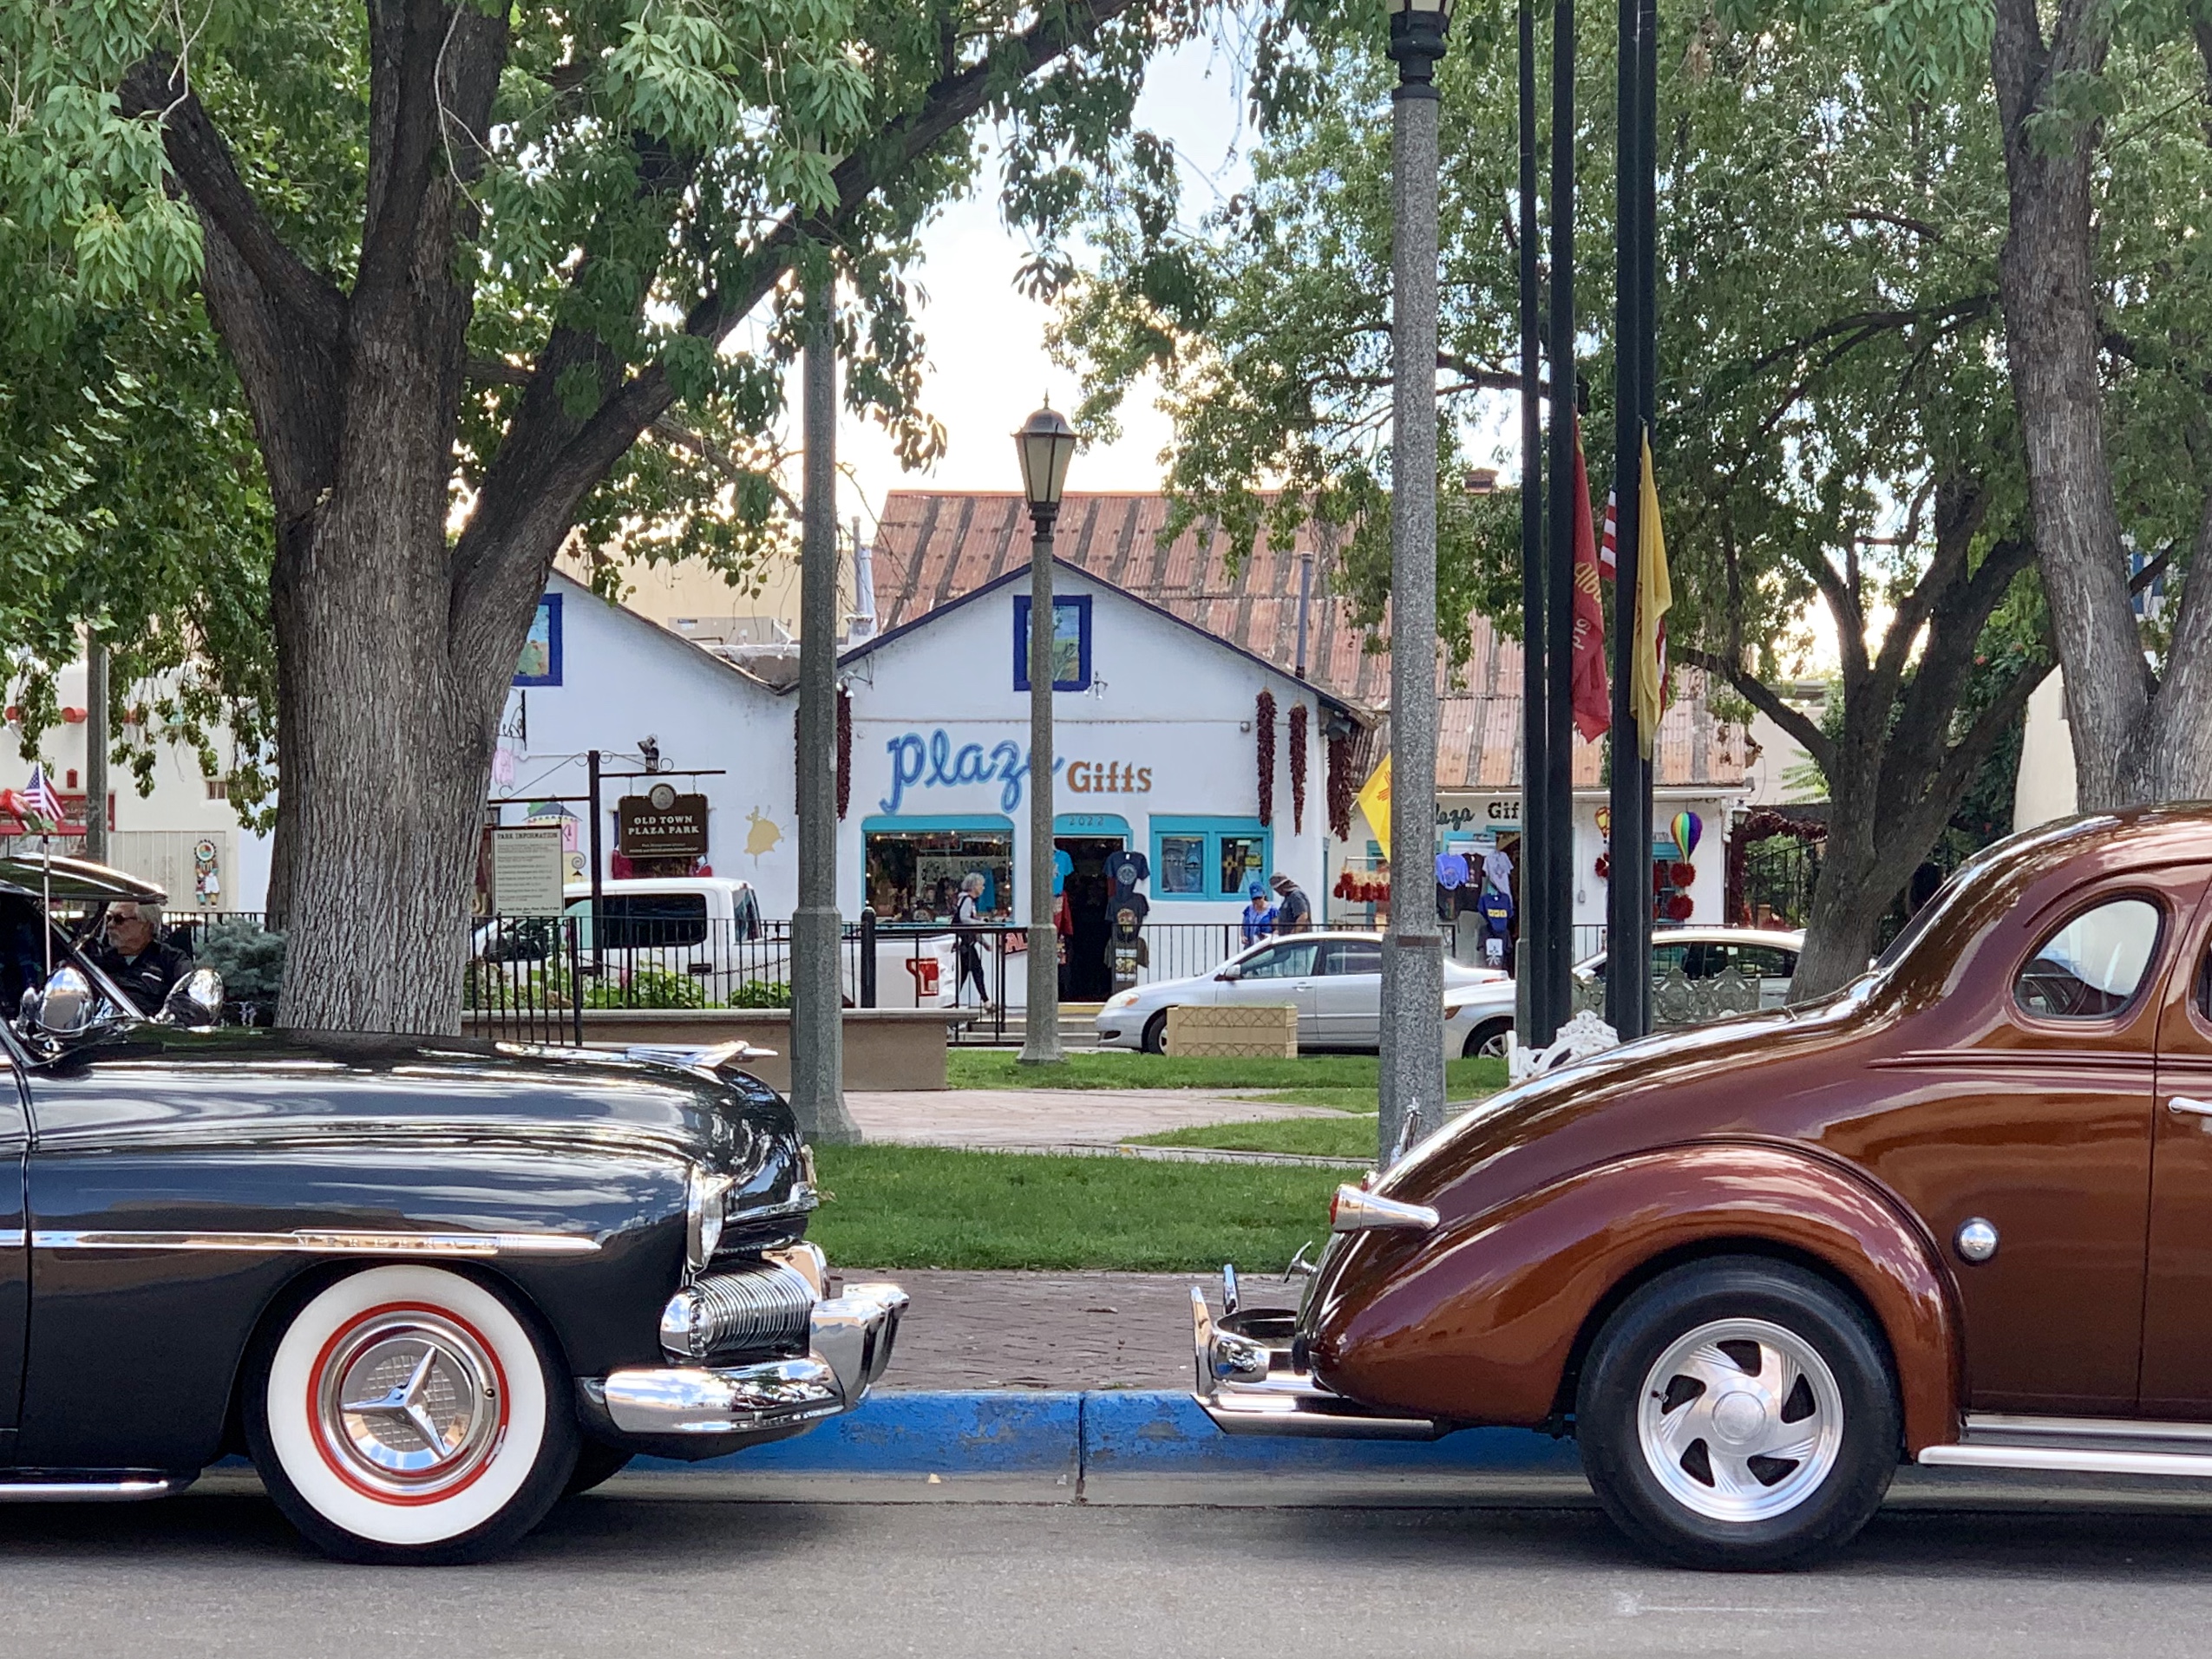 Classic cars parked around the square in Old Town Albuquerque